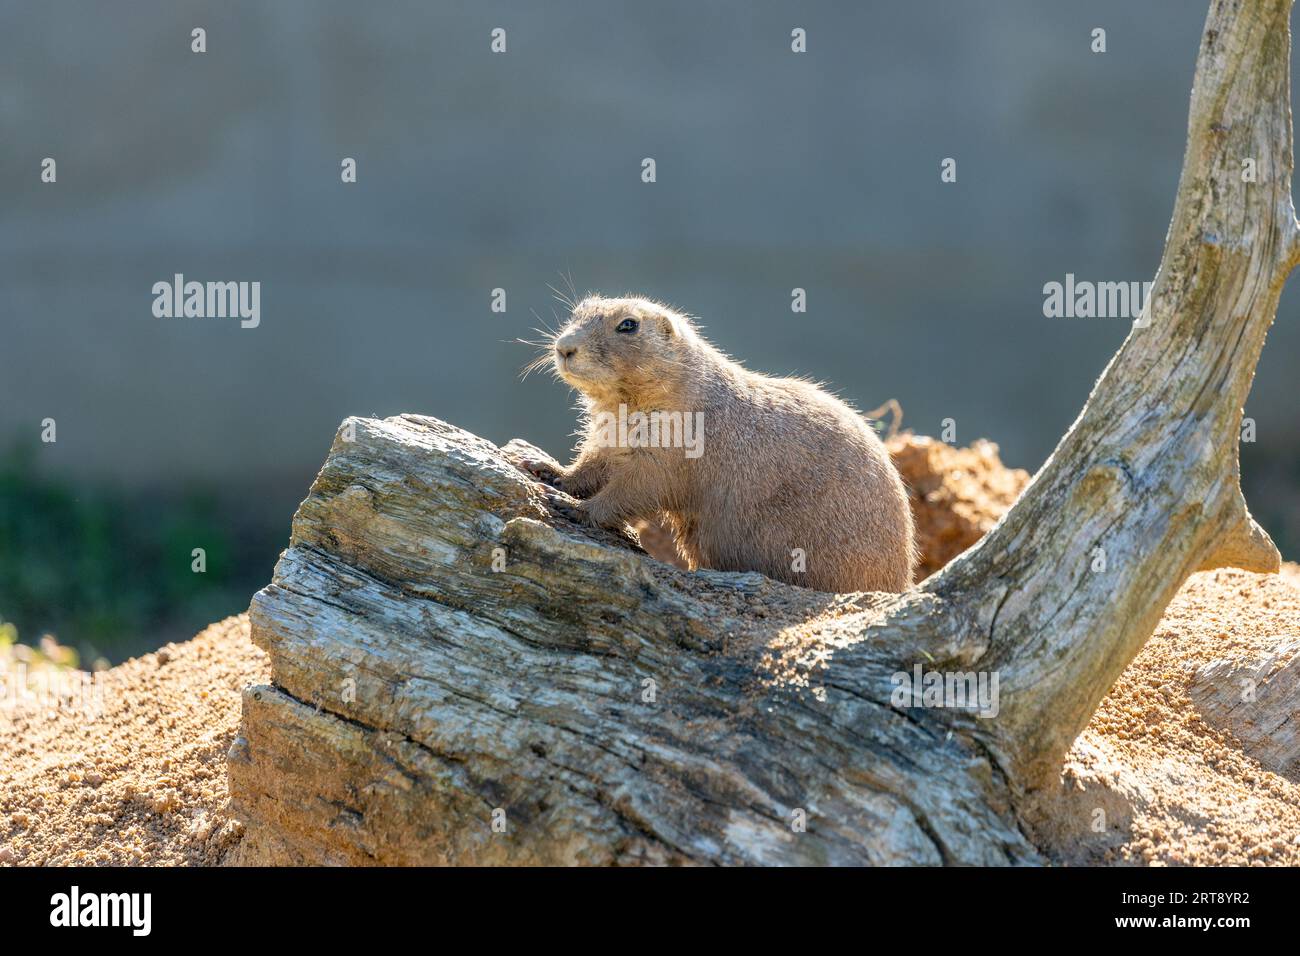 Charming Black-tailed Prairie Dogs, Cynomys ludovicianus, native to Mexico, thriving in their grassy habitats. Stock Photo